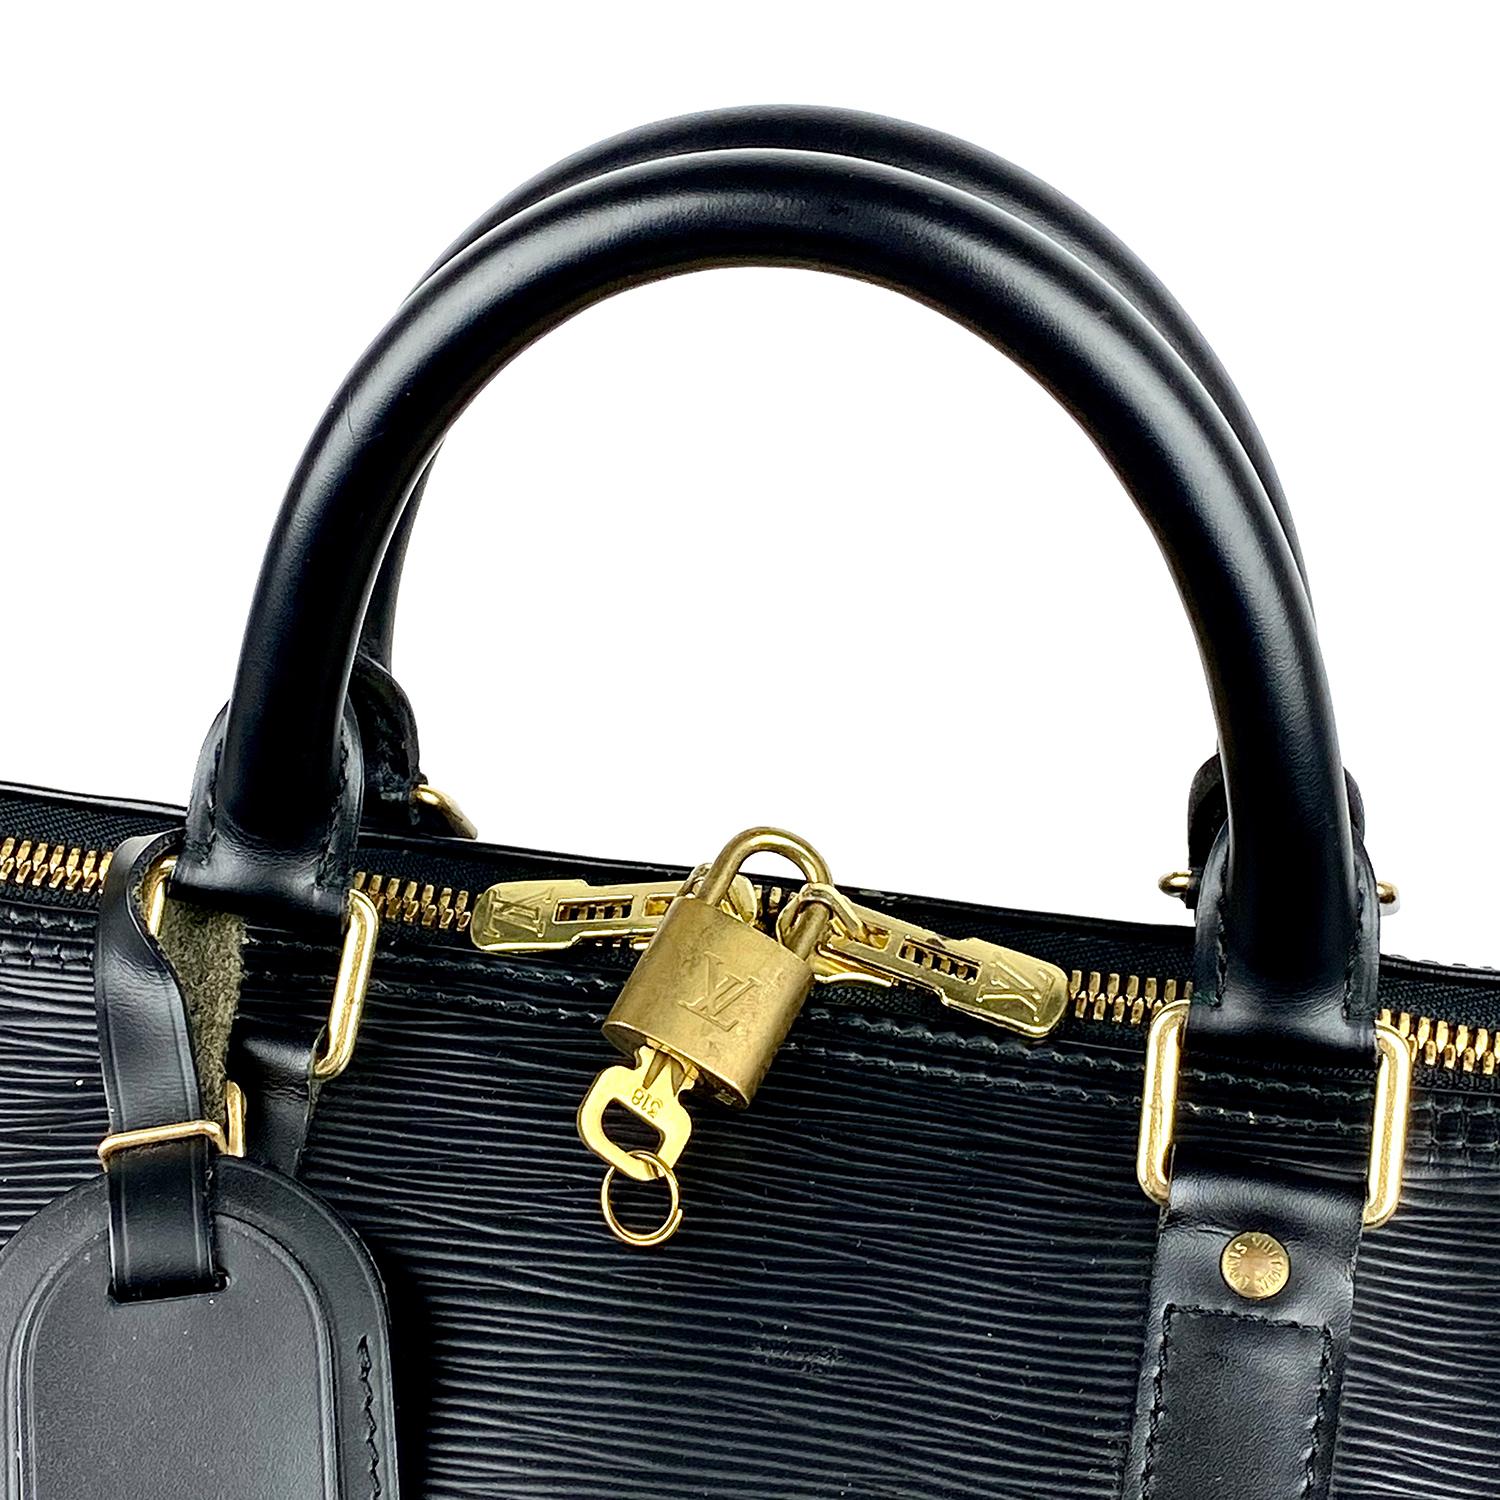 Black Epi leather Louis Vuitton Keepall 50 Weekend Bag For Sale 2